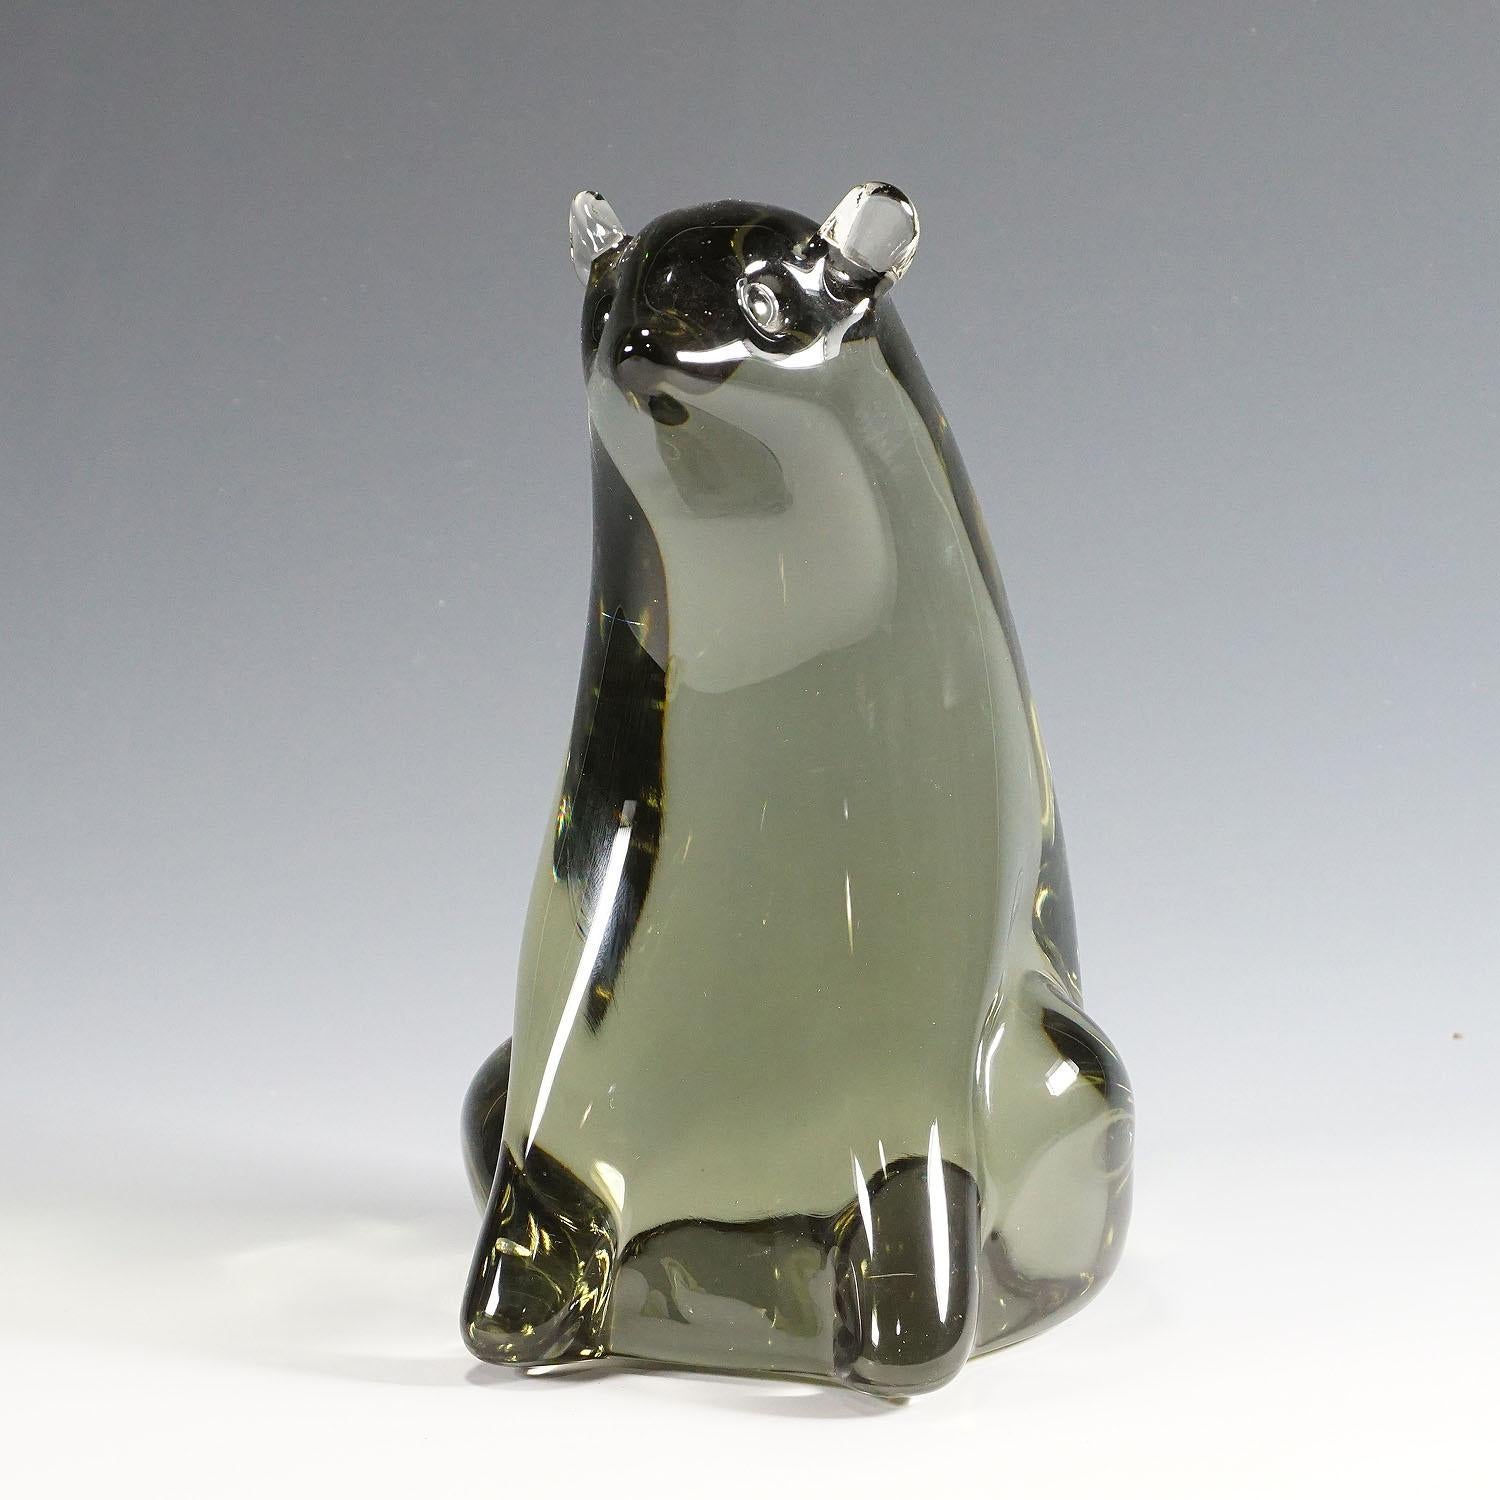 A powerful stylized sculpture of a bear in solid smoke grey glass. It is hand made in the Gral glass manufactory, Germany. The typical design of Livio Seguso in the 1970s. The base with incised signature of the artist (LS).

Livio Seguso (* 1930)